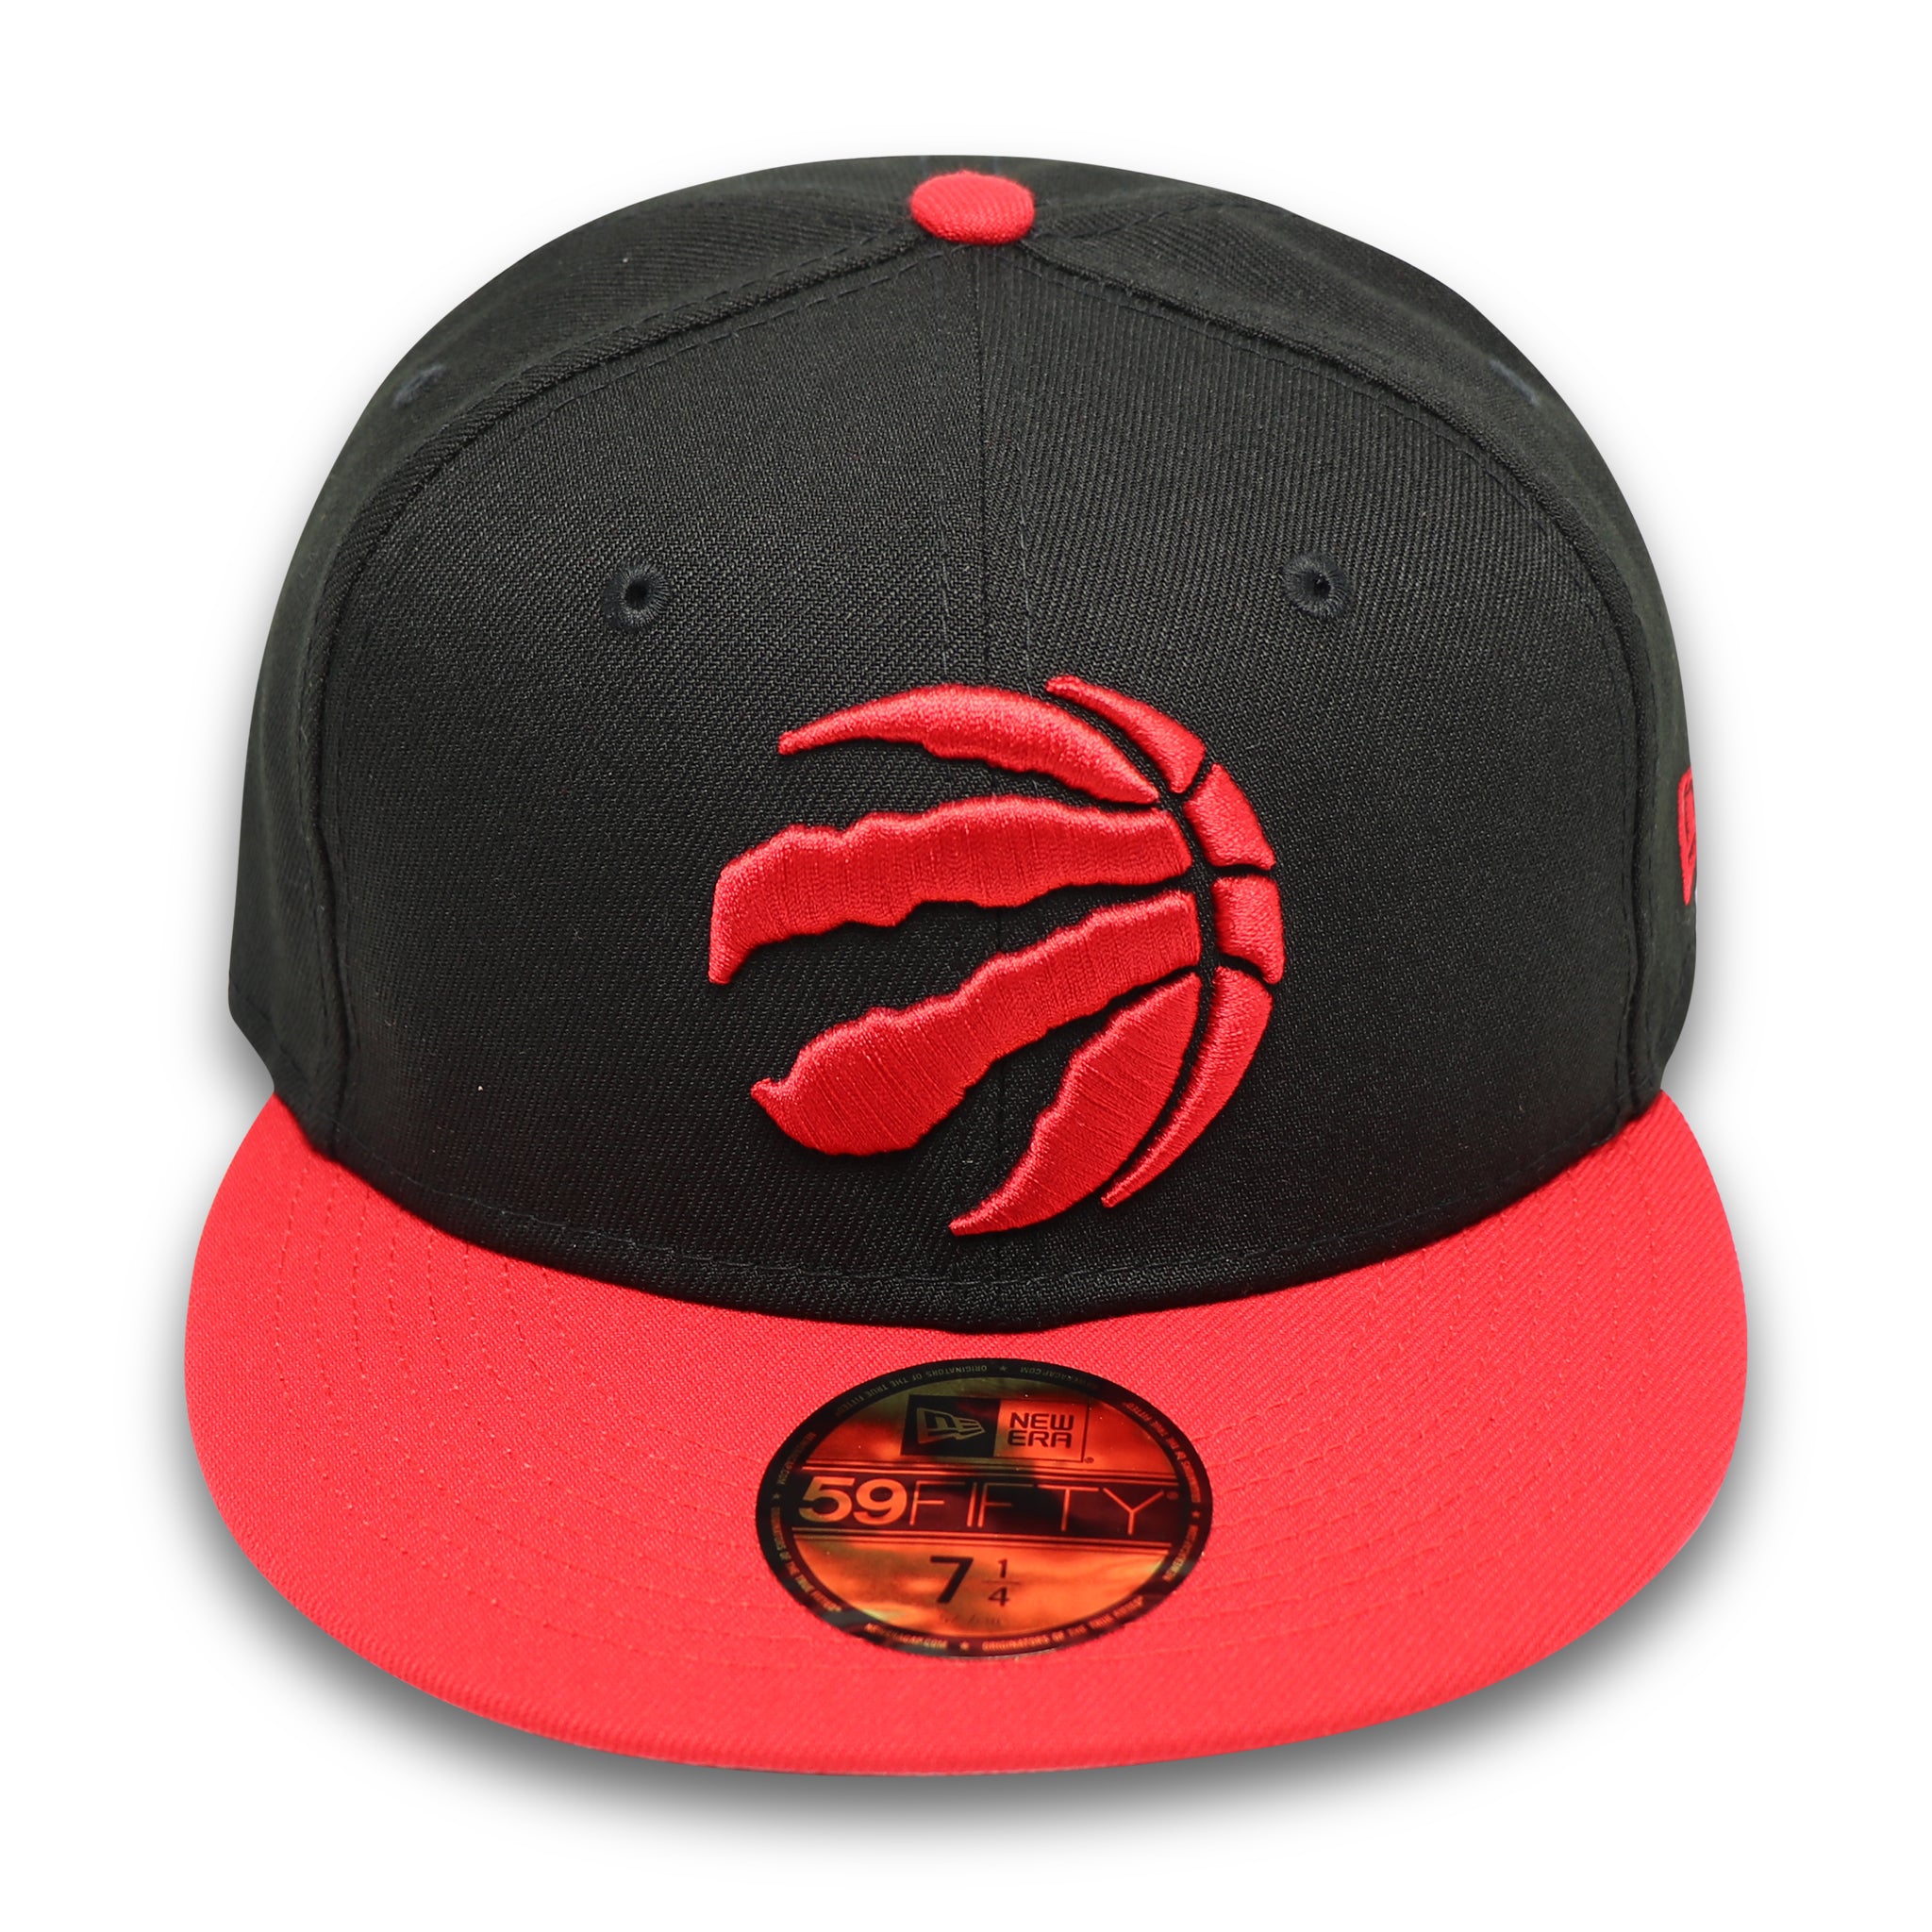 TORONTO RAPTORS 2-TONE (BLACK/RED) 59FITY NEW ERA FITTED